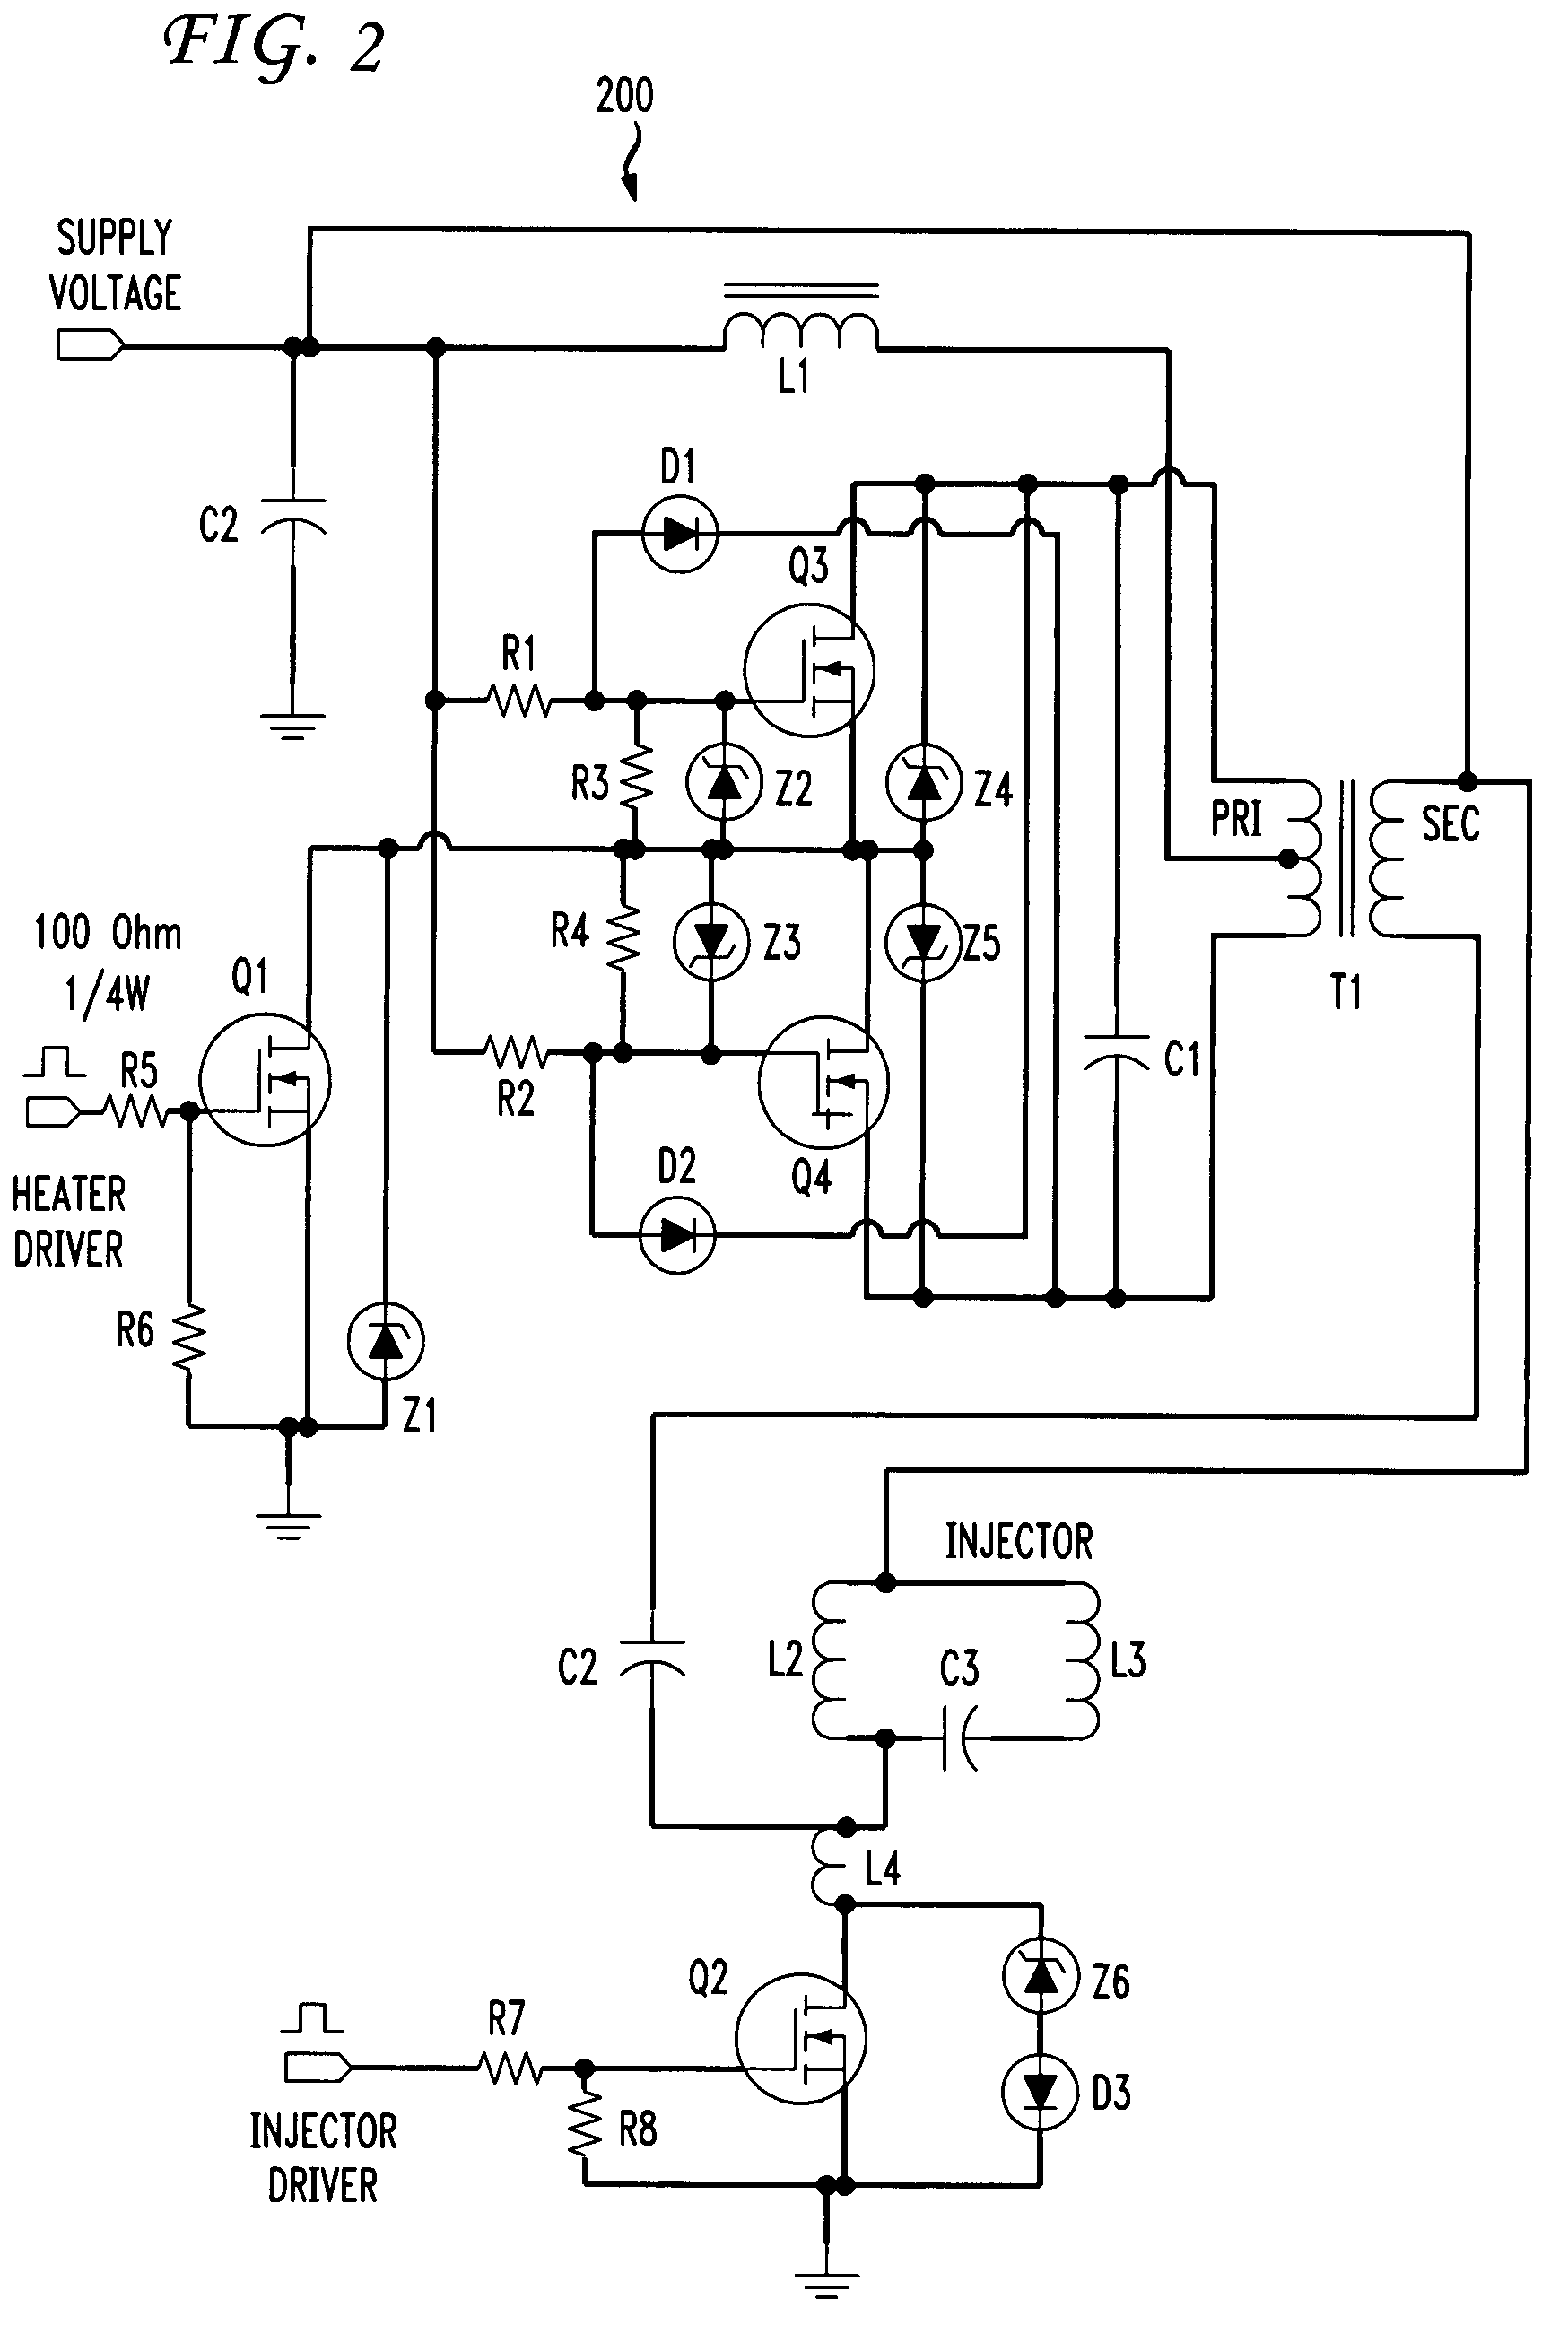 Constant current zero-voltage switching induction heater driver for variable spray injection